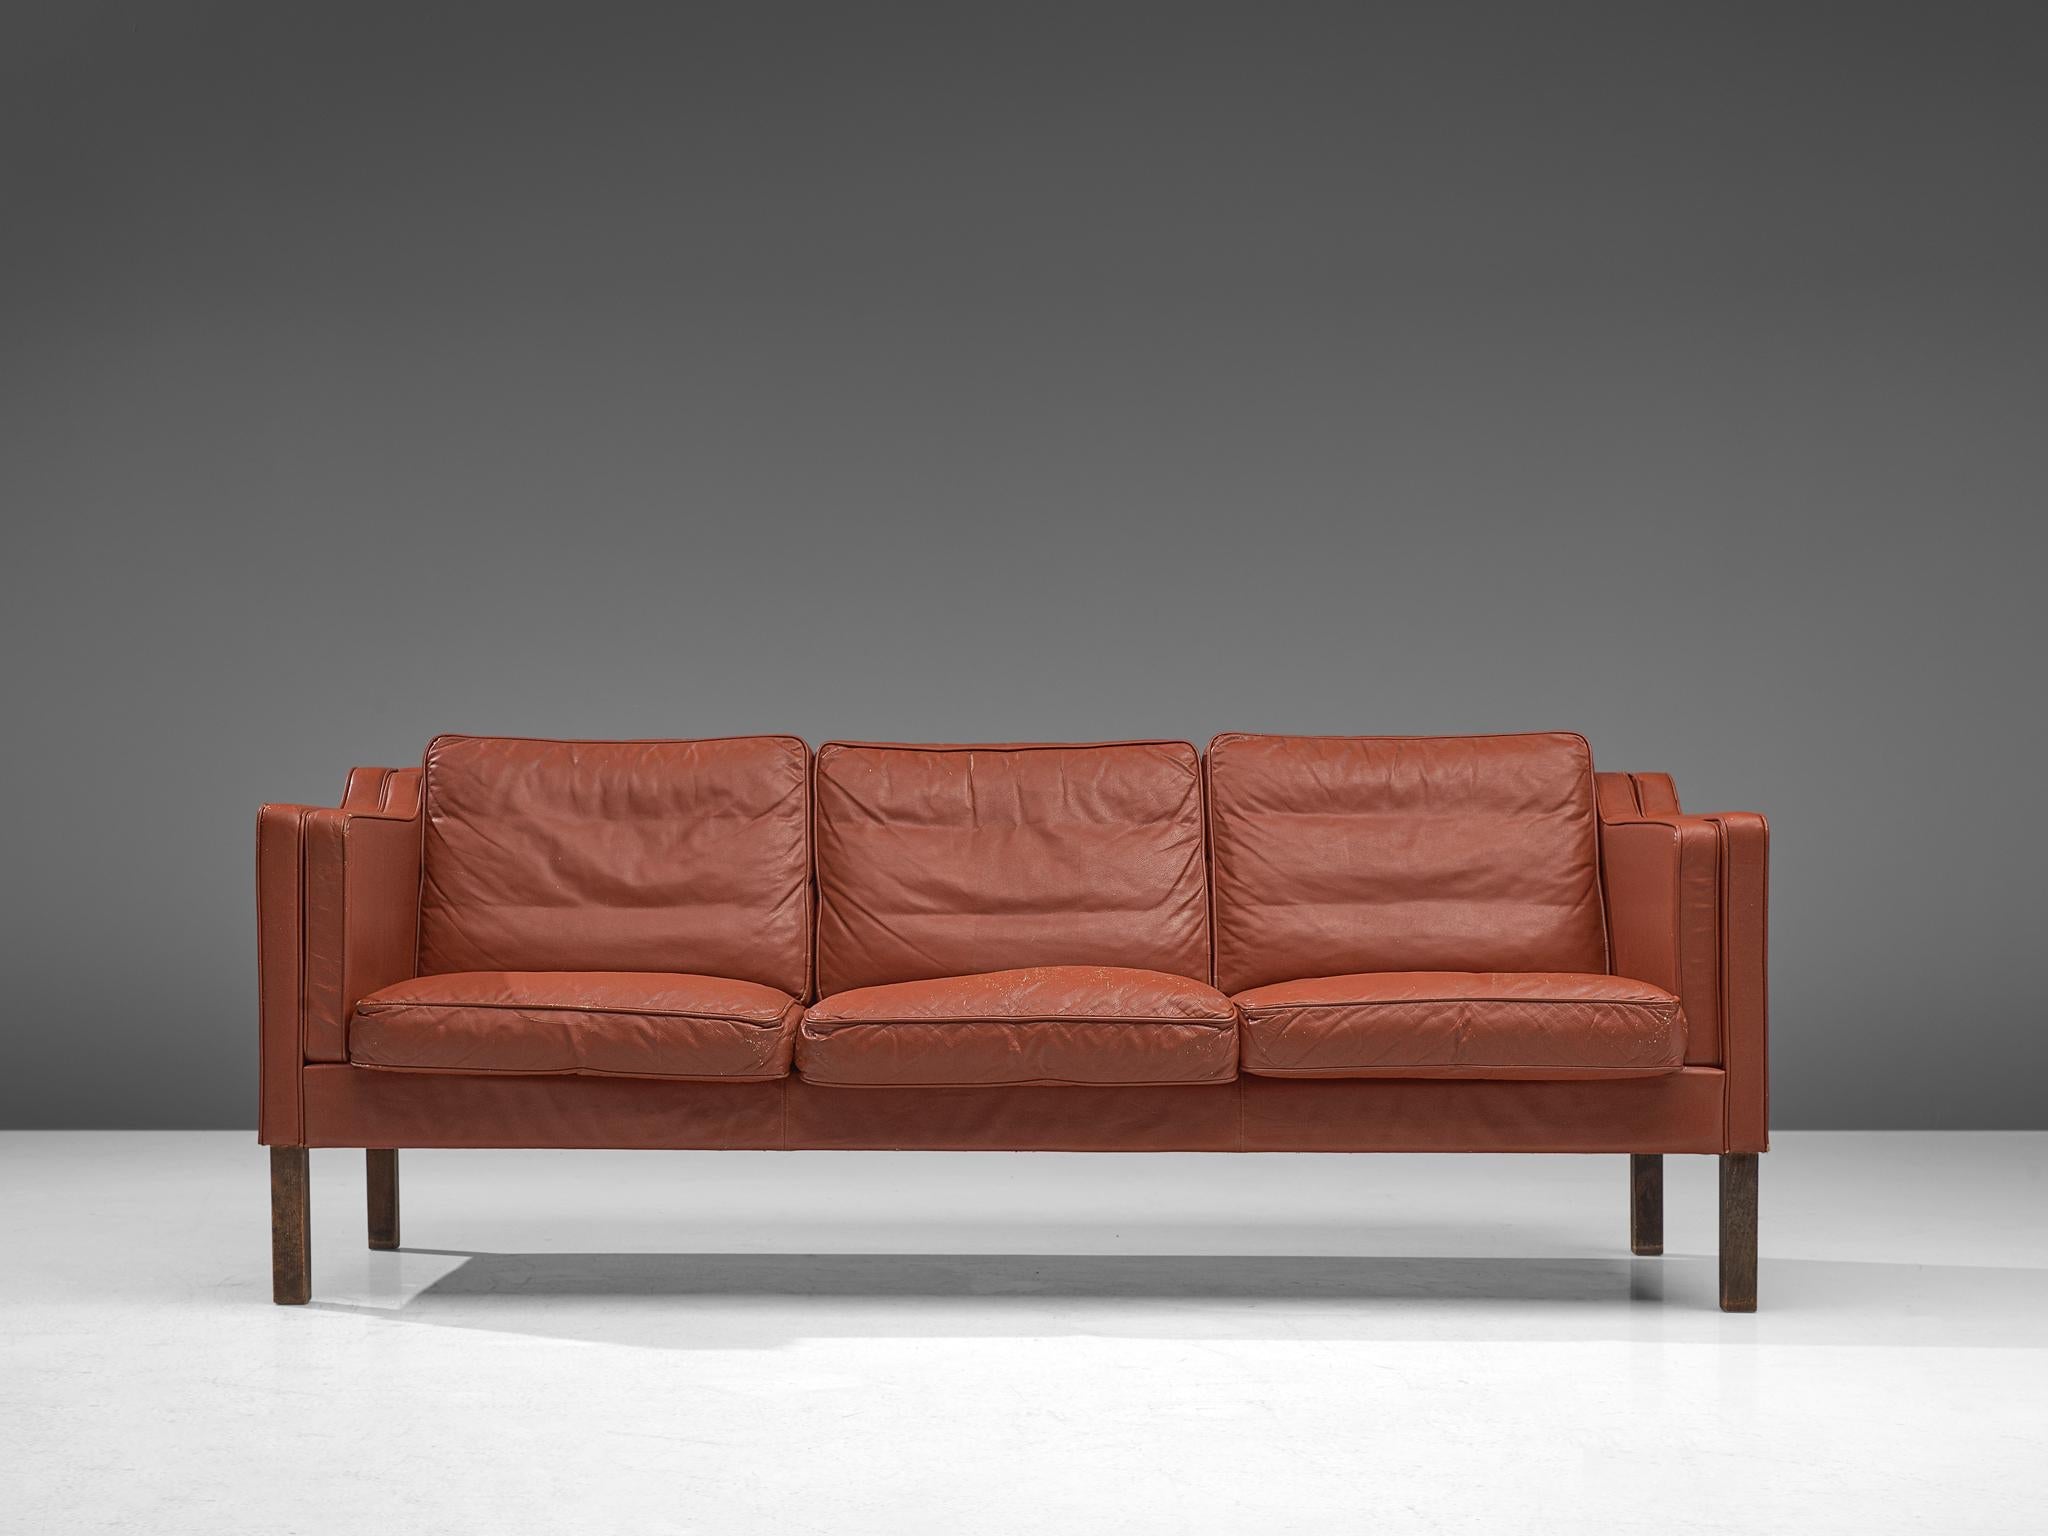 Danish Three-Seater Sofa in Red Leather